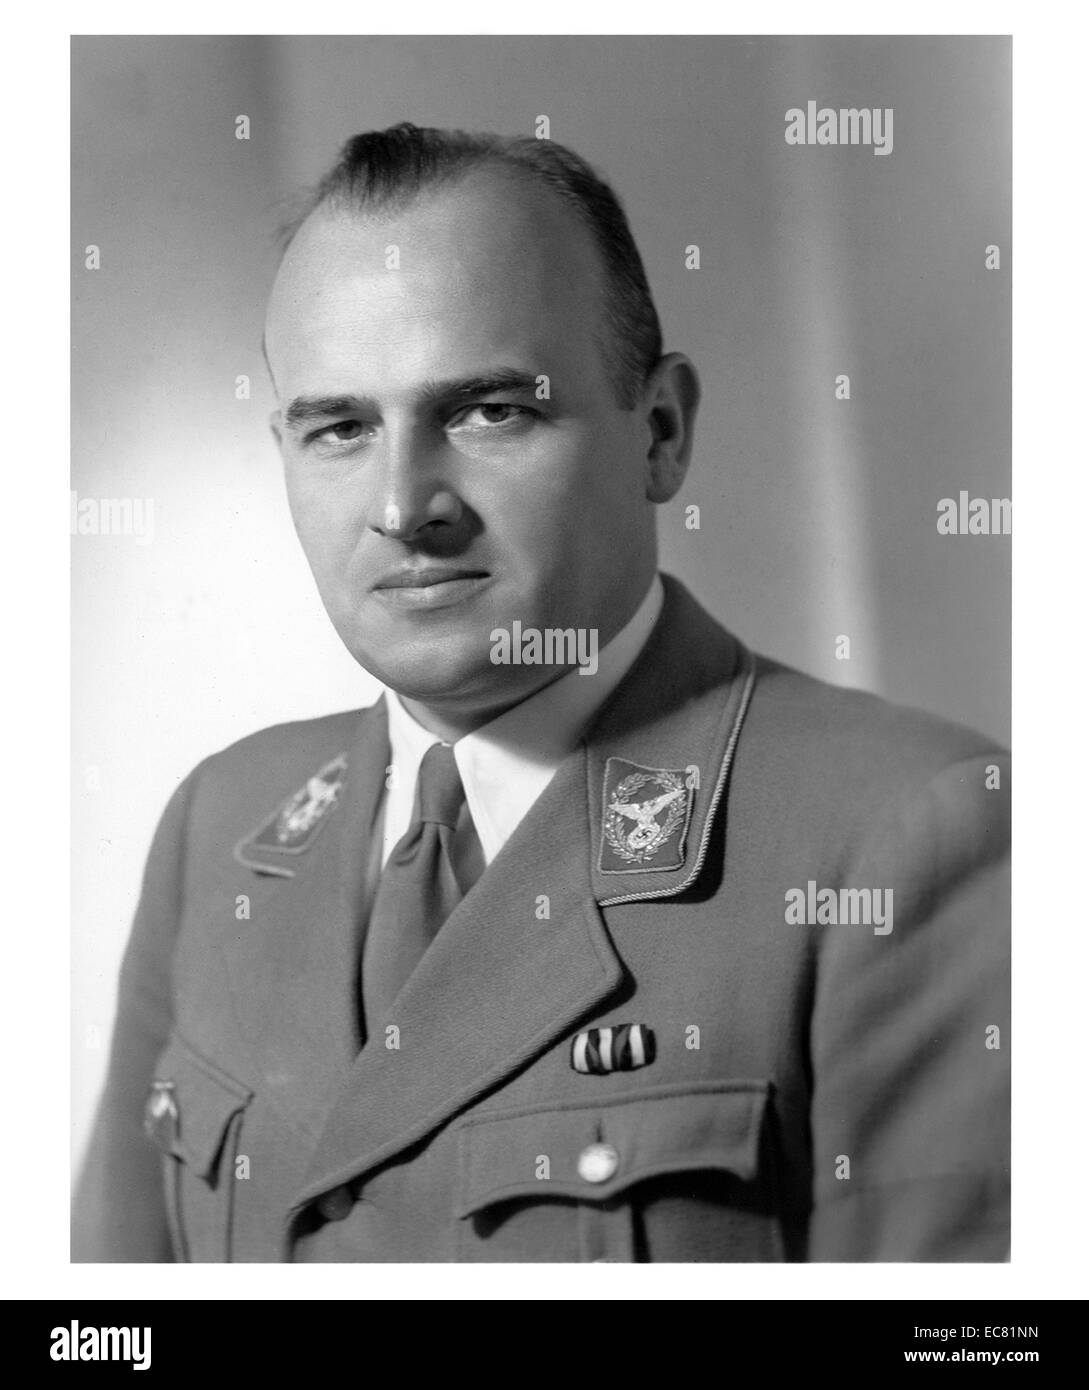 Photograph of Hans Michael Frank (1900 – 16 October 1946); German lawyer who worked for the Nazi Party during the 1920s and 1930s, He became Adolf Hitler's personal lawyer. After the invasion of Poland, Frank became Nazi Germany's chief jurist in the occupied Poland 'General Government' territory. Stock Photo